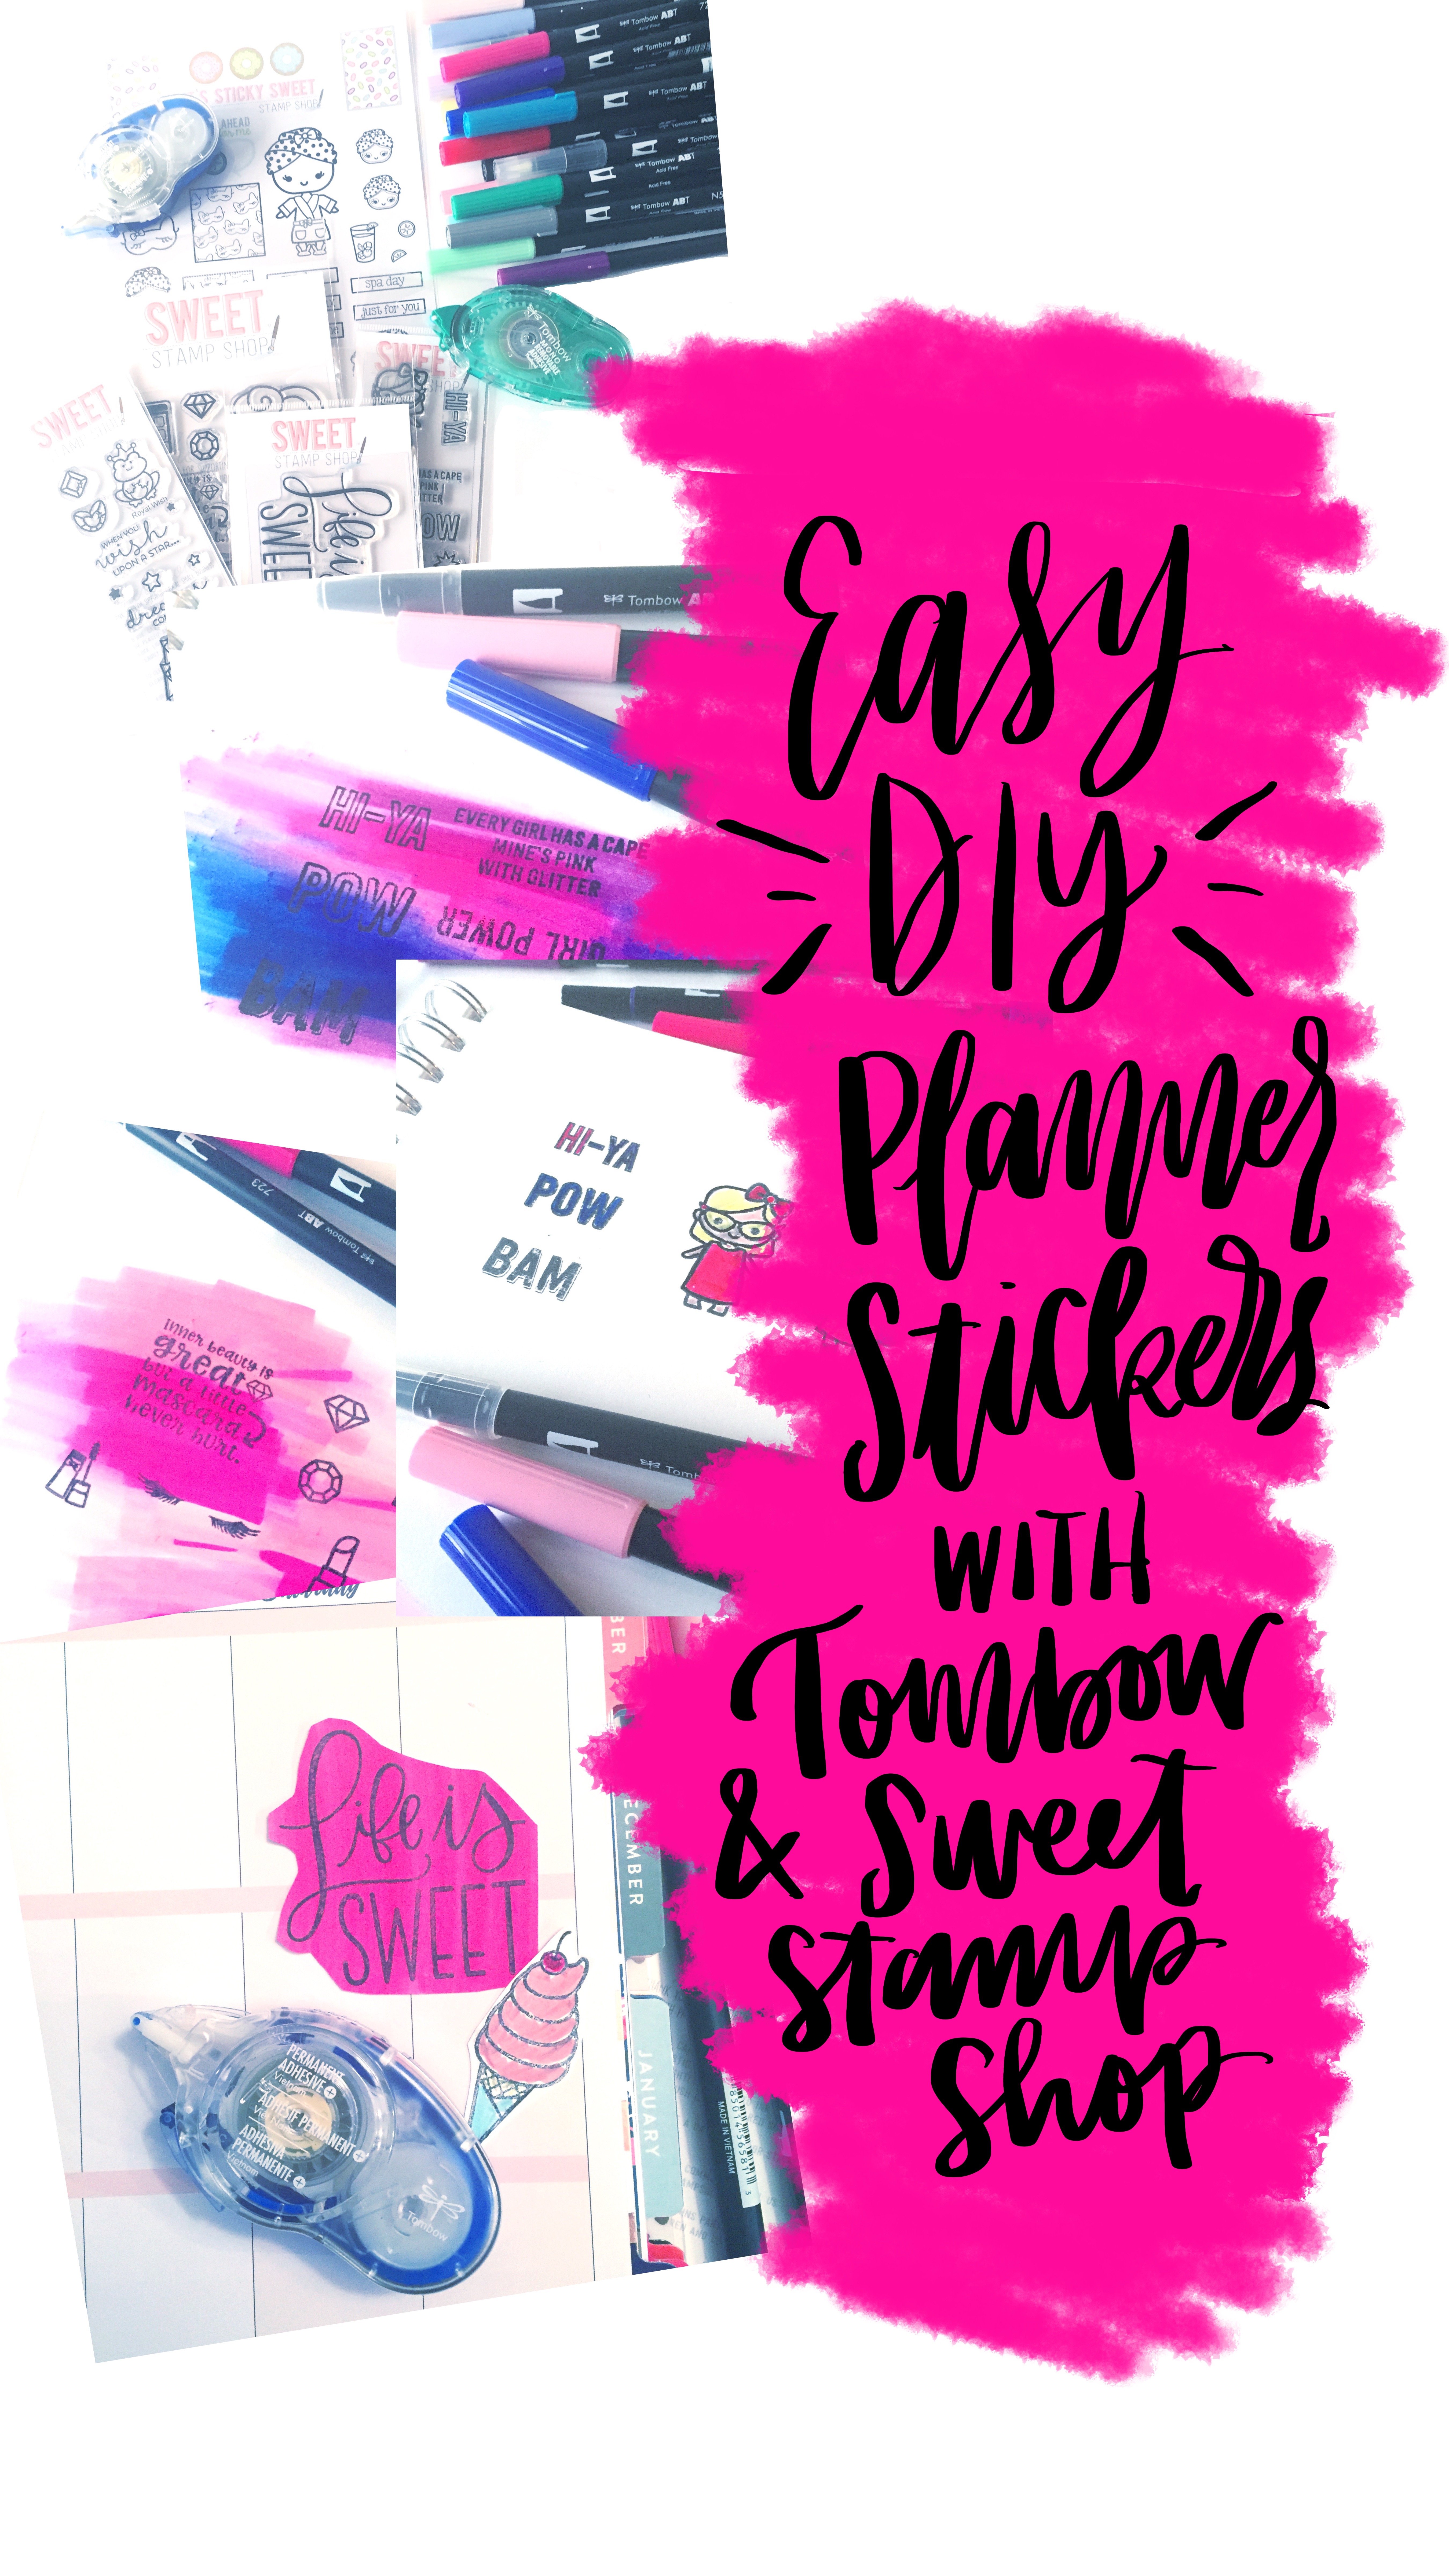 Lauren Fitzmaurice of @renmadecalligraphy and Renmadecalligraphy.com shares how to use Tombow USA products paired with products from Sweet Stamp Shop to create easy planner stickers. For more information about the products used check out TombowUSA.com and Sweetstampshop.com.